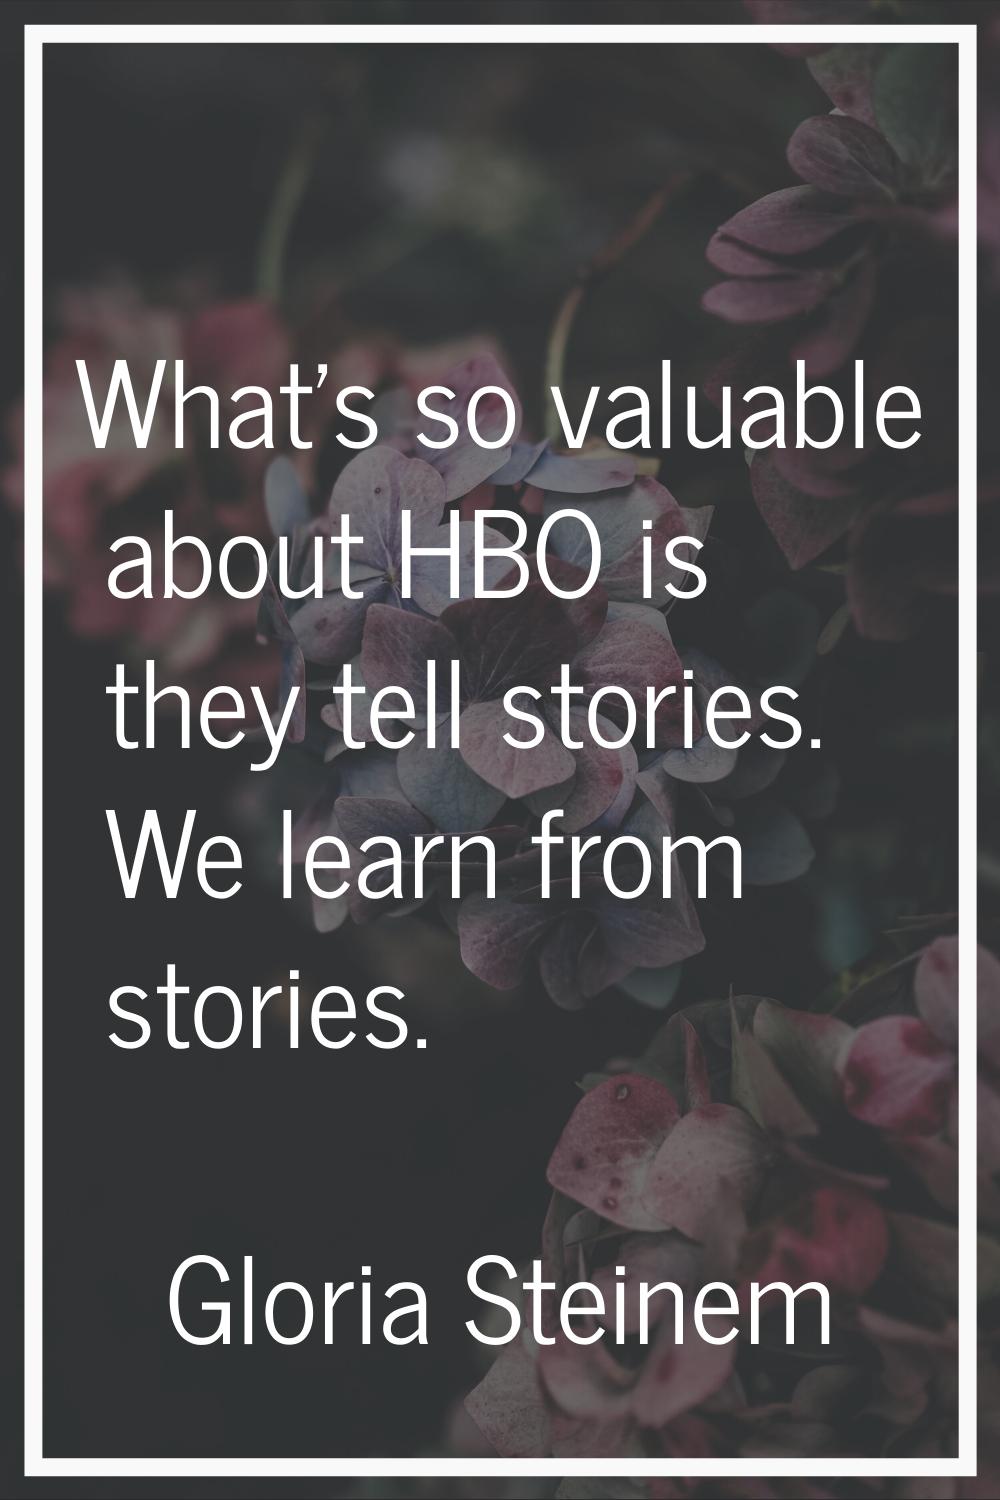 What's so valuable about HBO is they tell stories. We learn from stories.